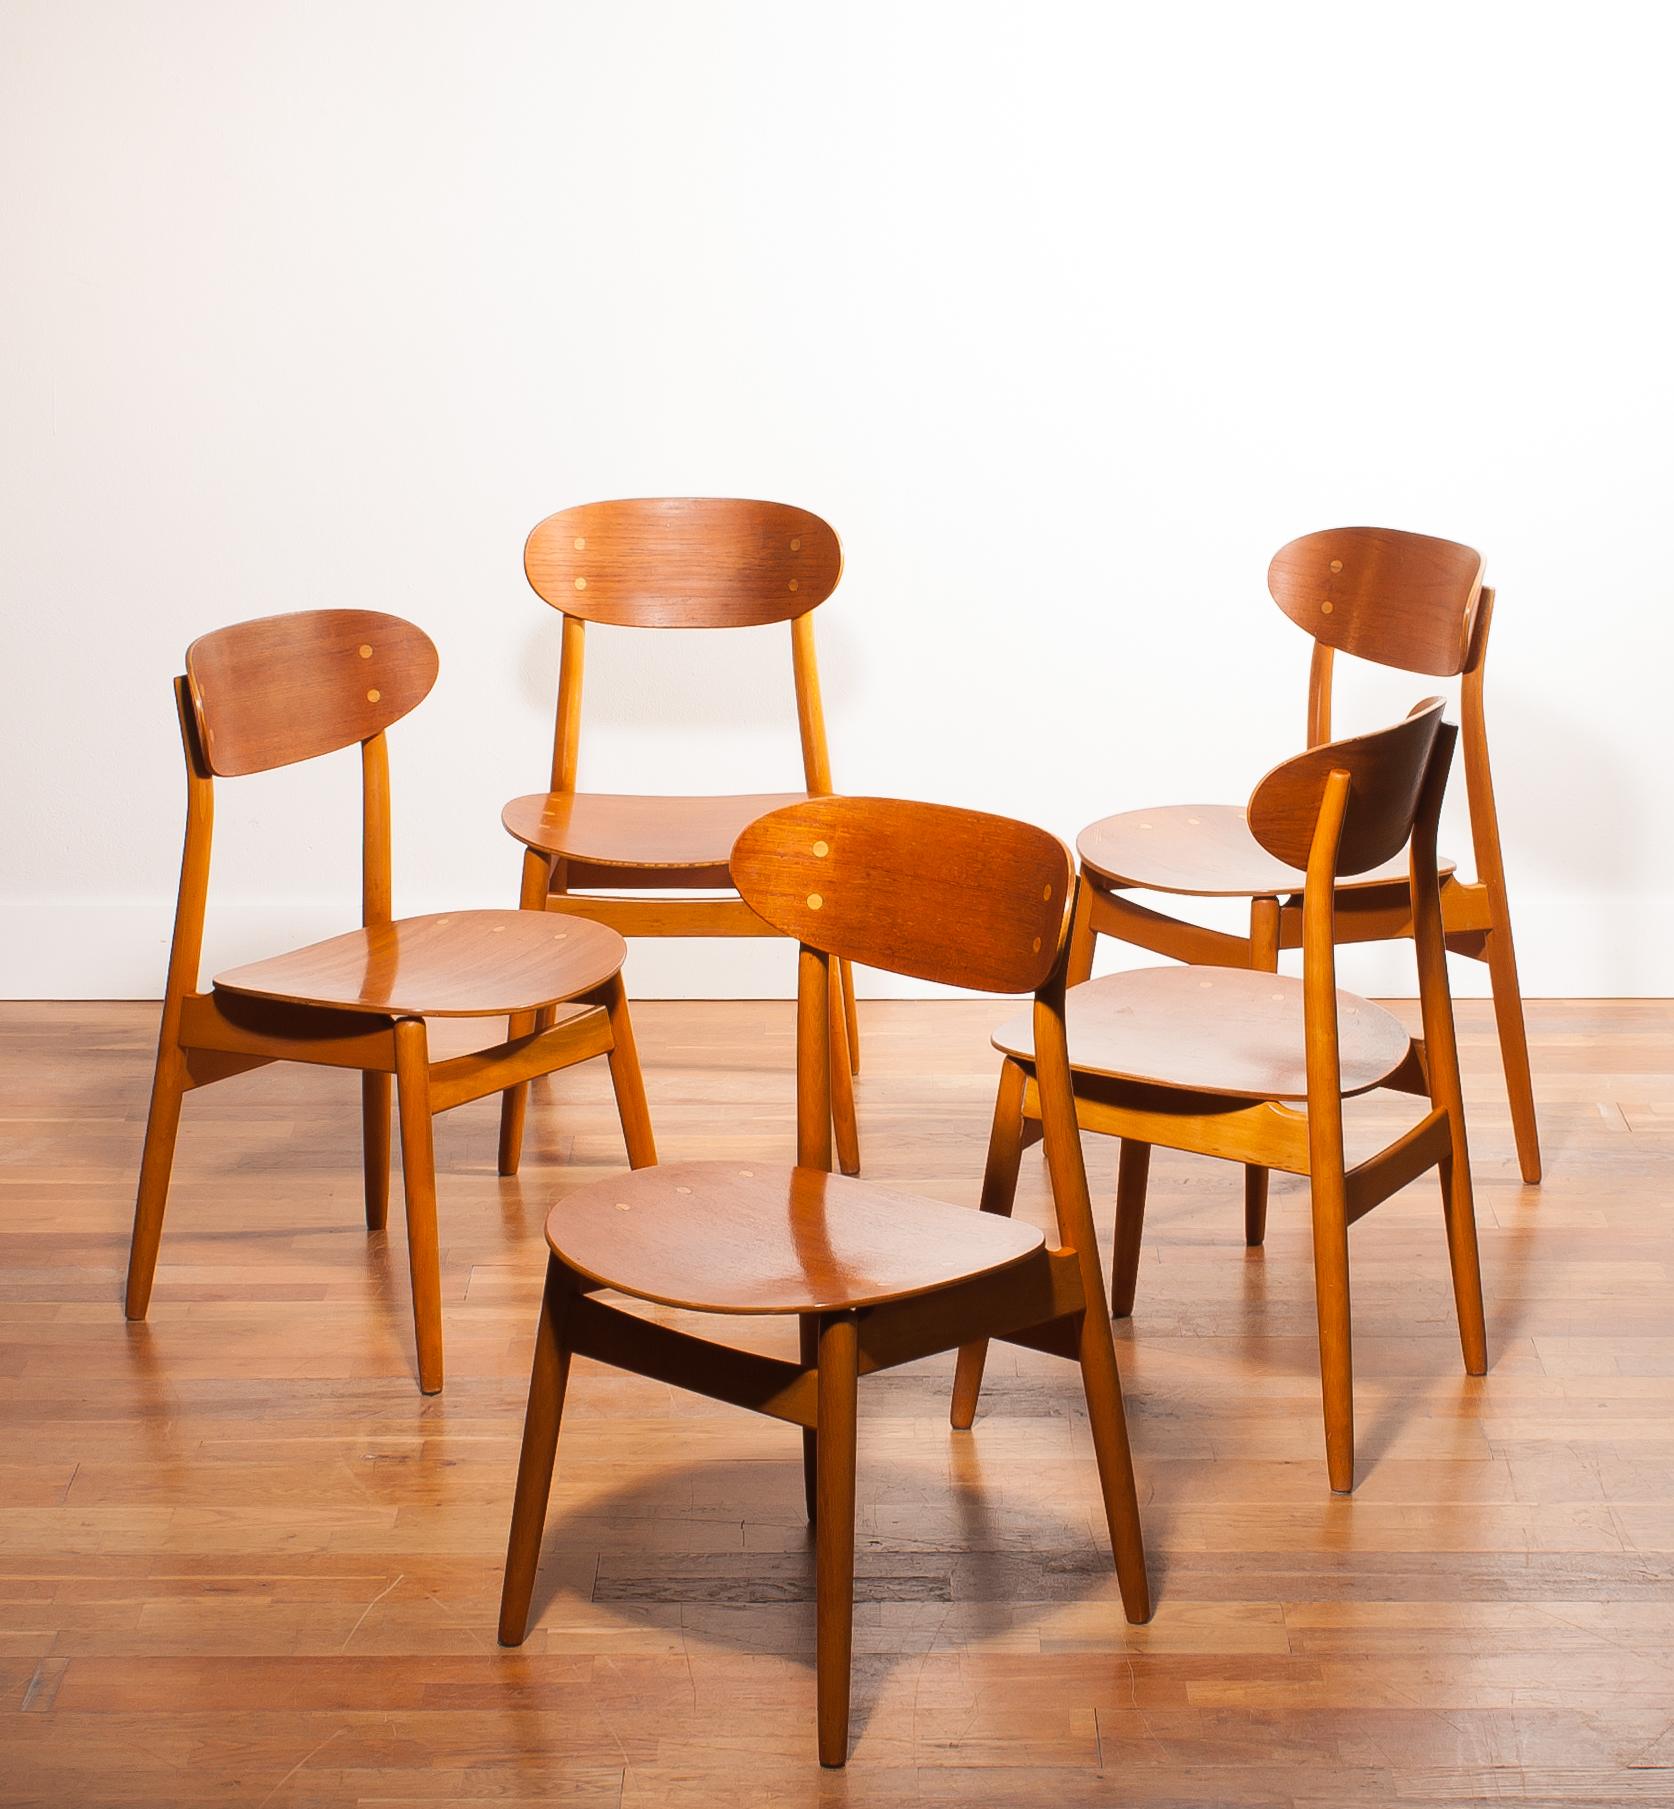 A very nice set of five dining chairs, model Eva, designed by Sven Erik Frylund for Hogafors Stolfabrik, Nässjö Denmark (marked)
The chairs are made of a teak seating and backrest on a beech frame.
They are in beautiful condition.
Period